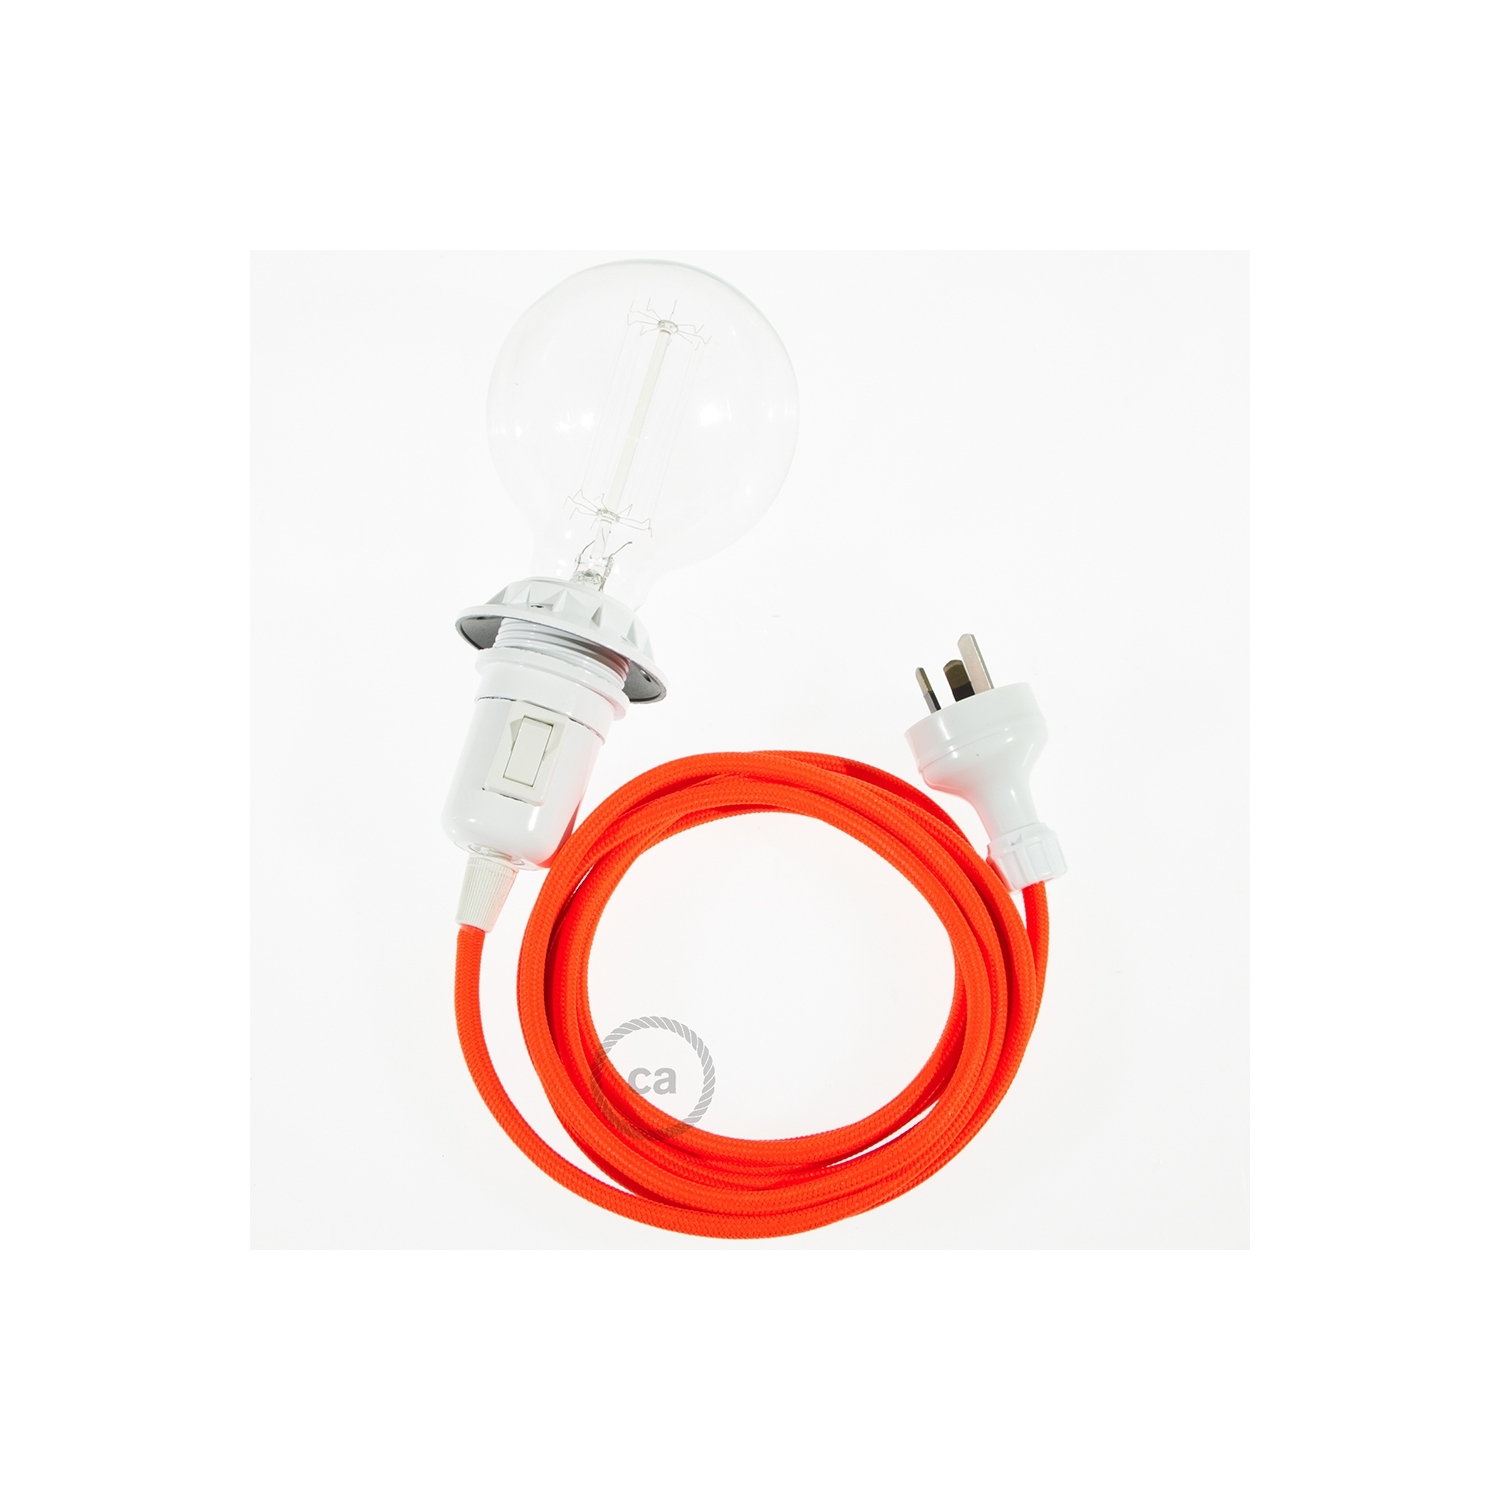 Create your RF15 Orange Fluo Snake for lampshade and bring the light wherever you want.